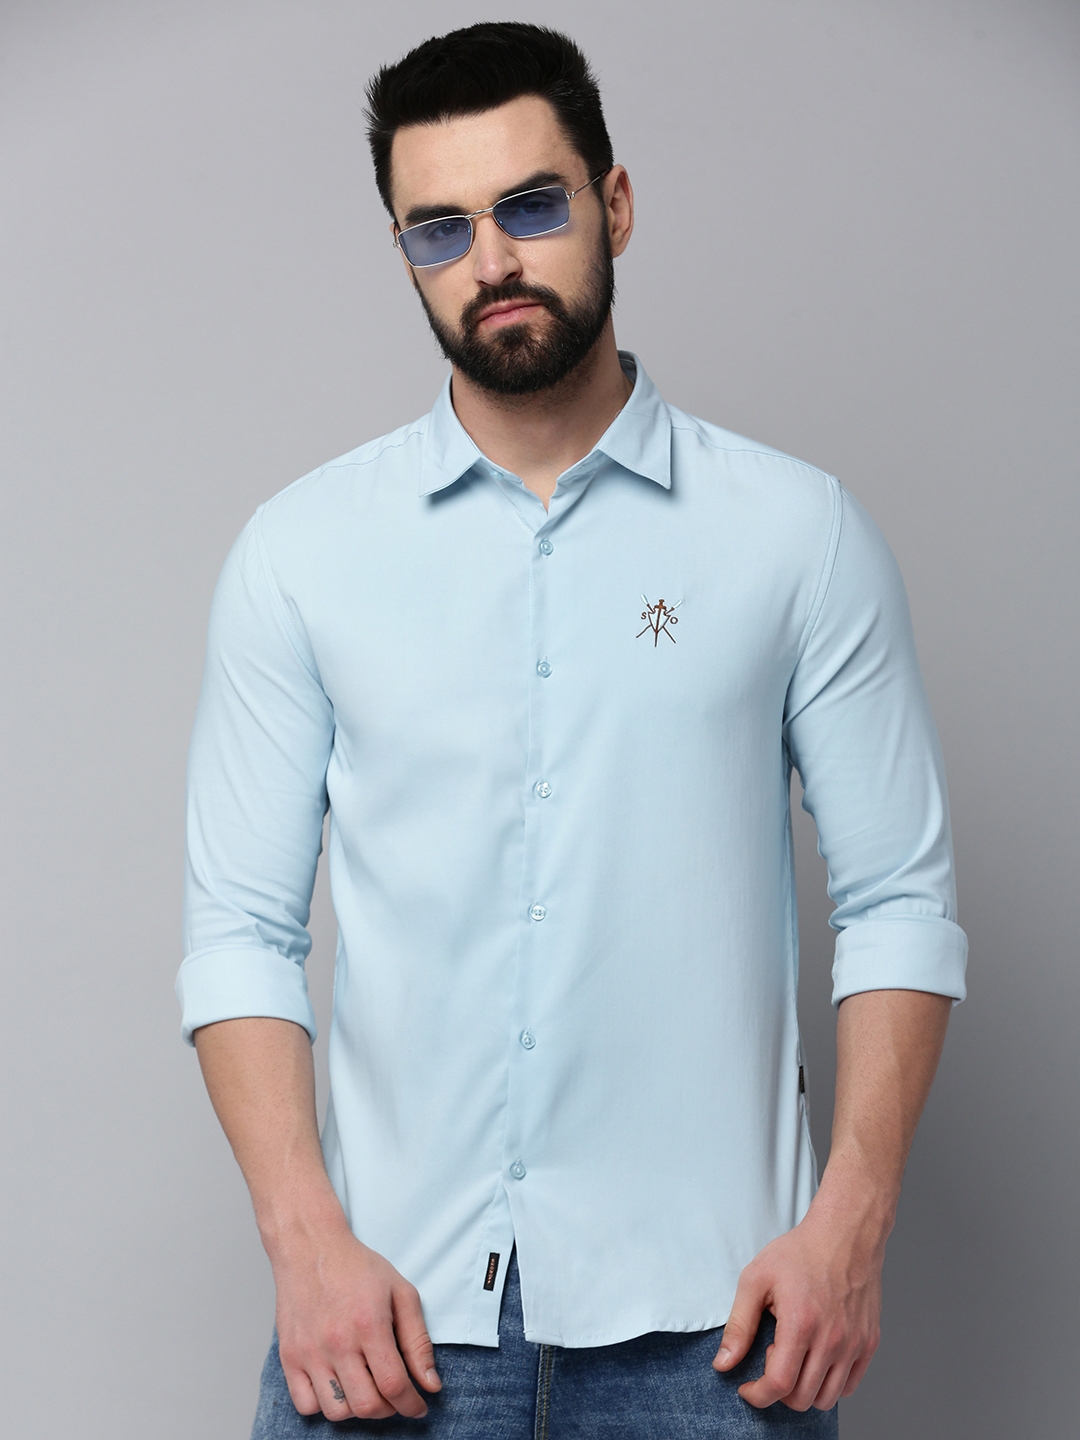 SHOWOFF Men's Spread Collar Long Sleeves Solid Blue Shirt